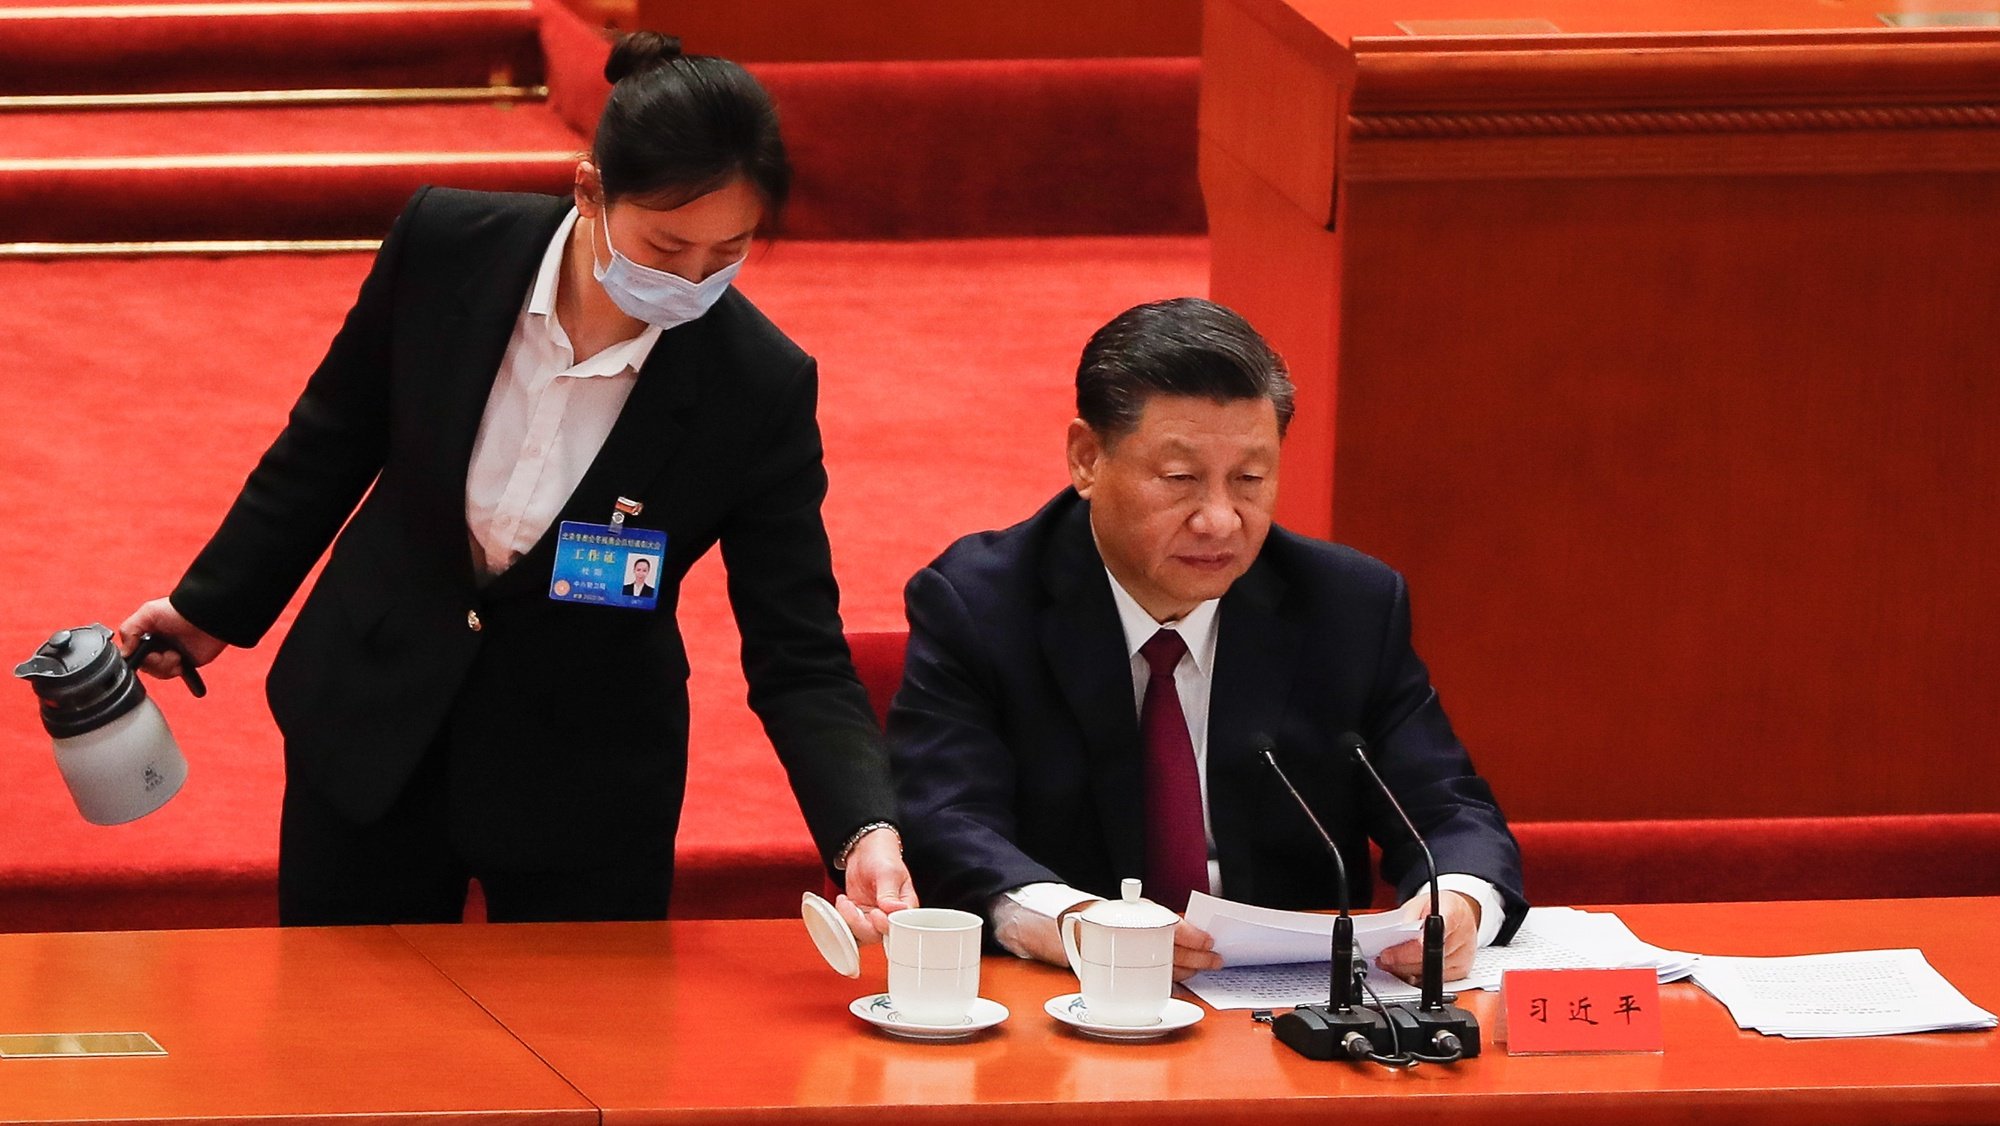 epa09877775 A staff serves tea to Chinese President Xi Jinping (R) during his speech at a meeting commending role models of the Beijing 2022 Olympic Winter Games and Paralympic Winter Games at the Great Hall of the People in Beijing, China, 08 April 2022. The 2022 Winter Olympics was held in Beijing from 04 to 20 February, while the 2022 Winter Paralympics from 04 to 13 March 2022.  EPA/MARK R. CRISTINO